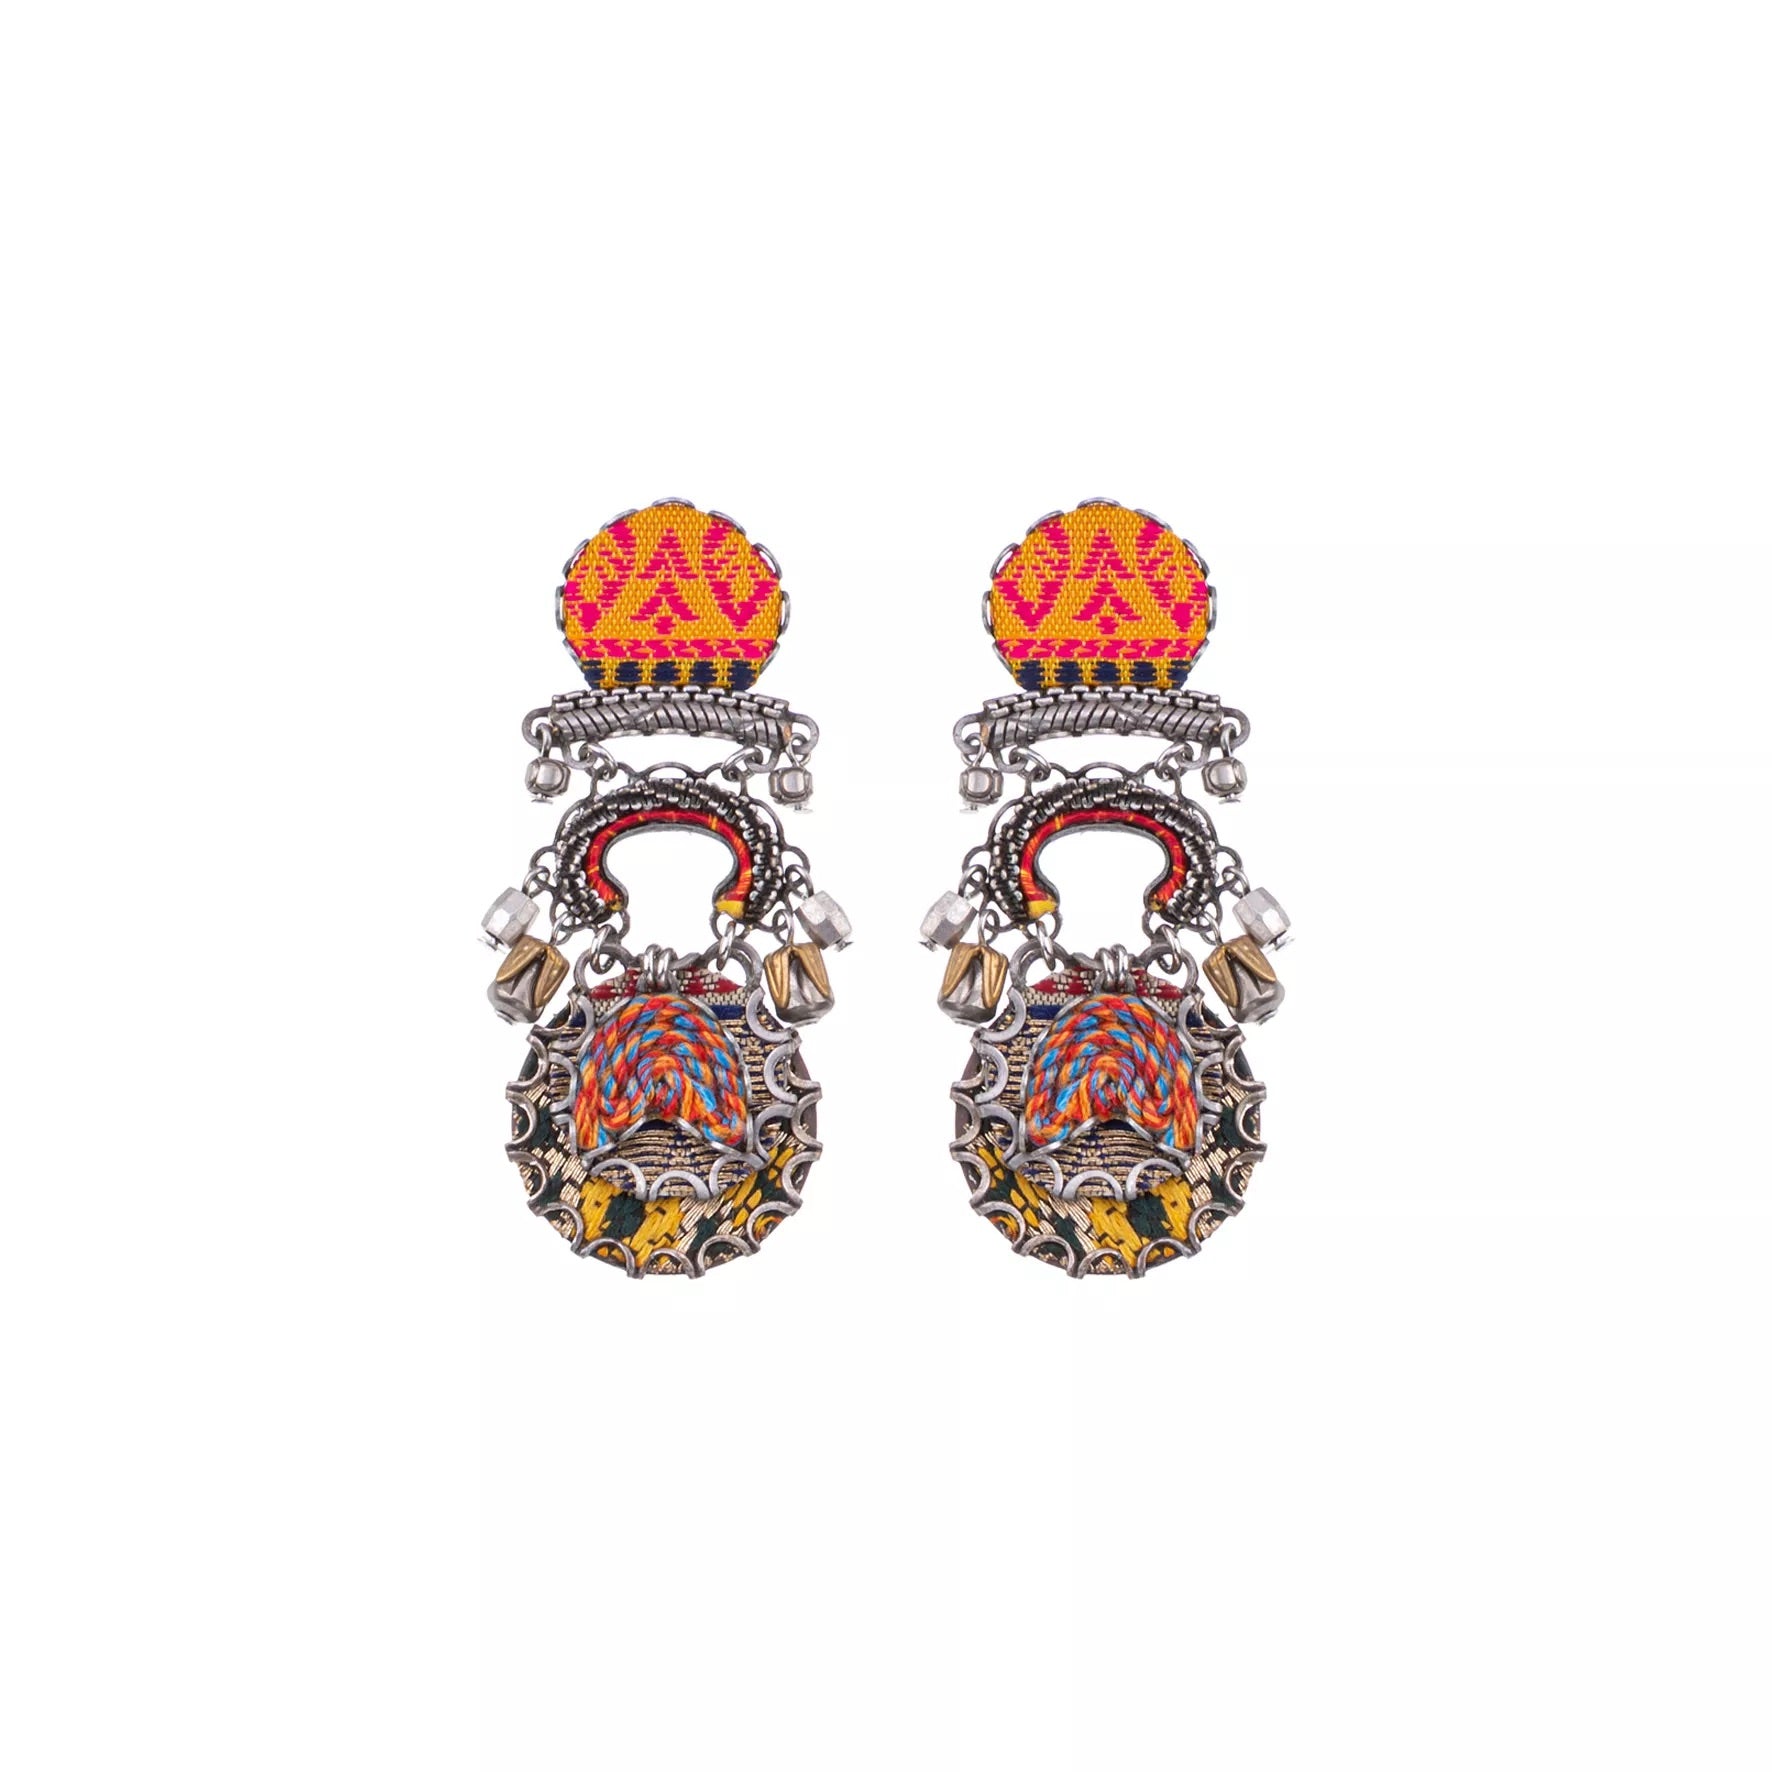 EMBROIDERED DREAM, VALO EARRINGS